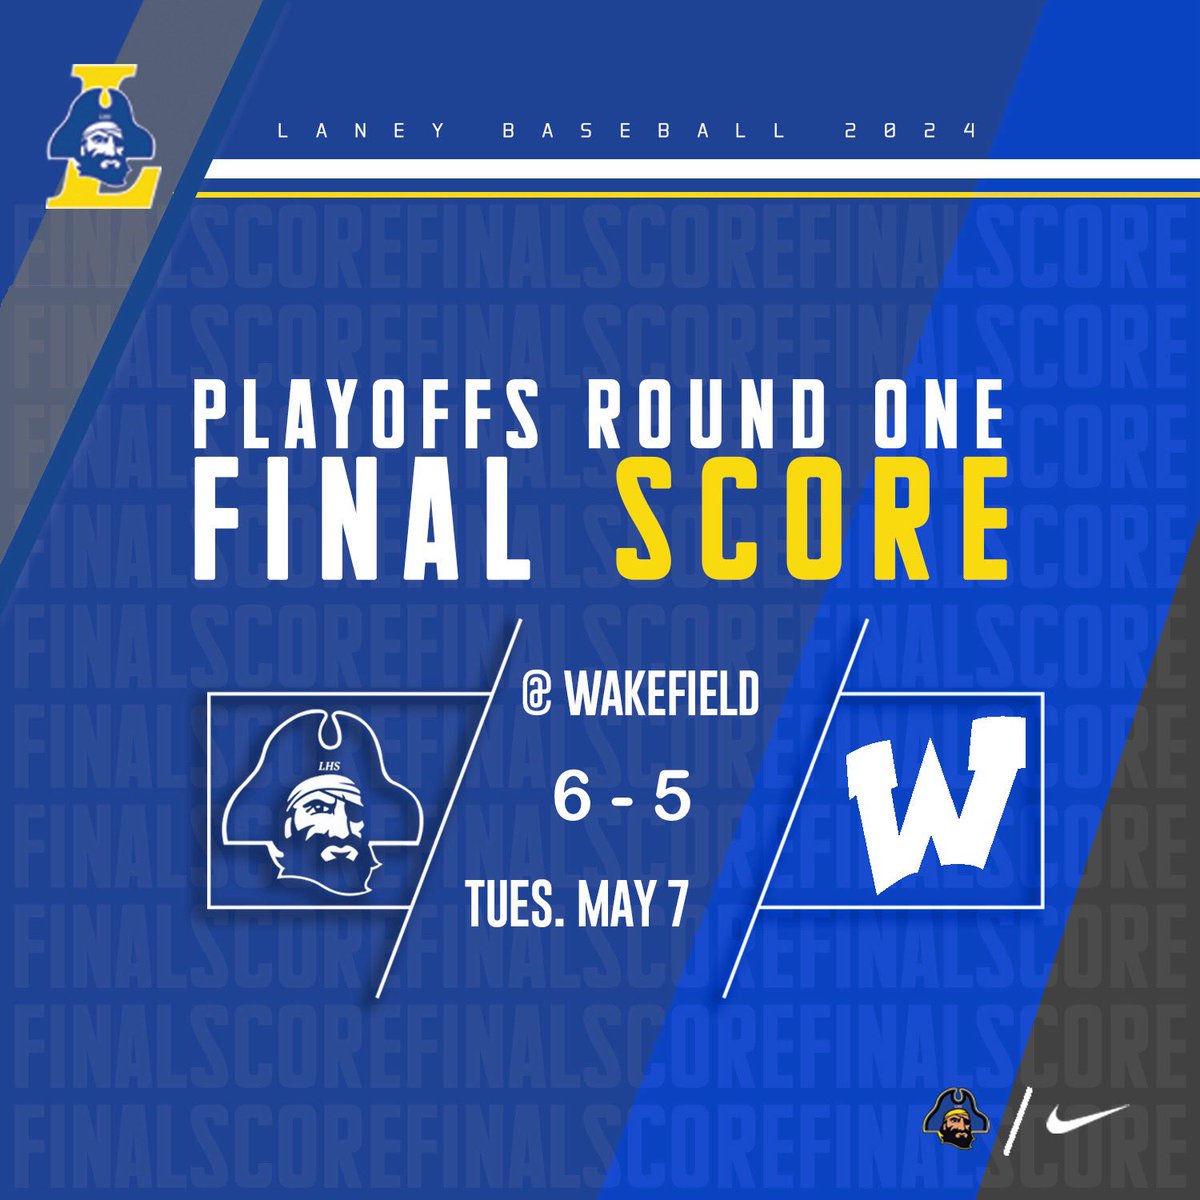 Playoff Dub feels good! Bucs pick up a victory over Wakefield 6-5. First playoff win since 2021. #keeprolling